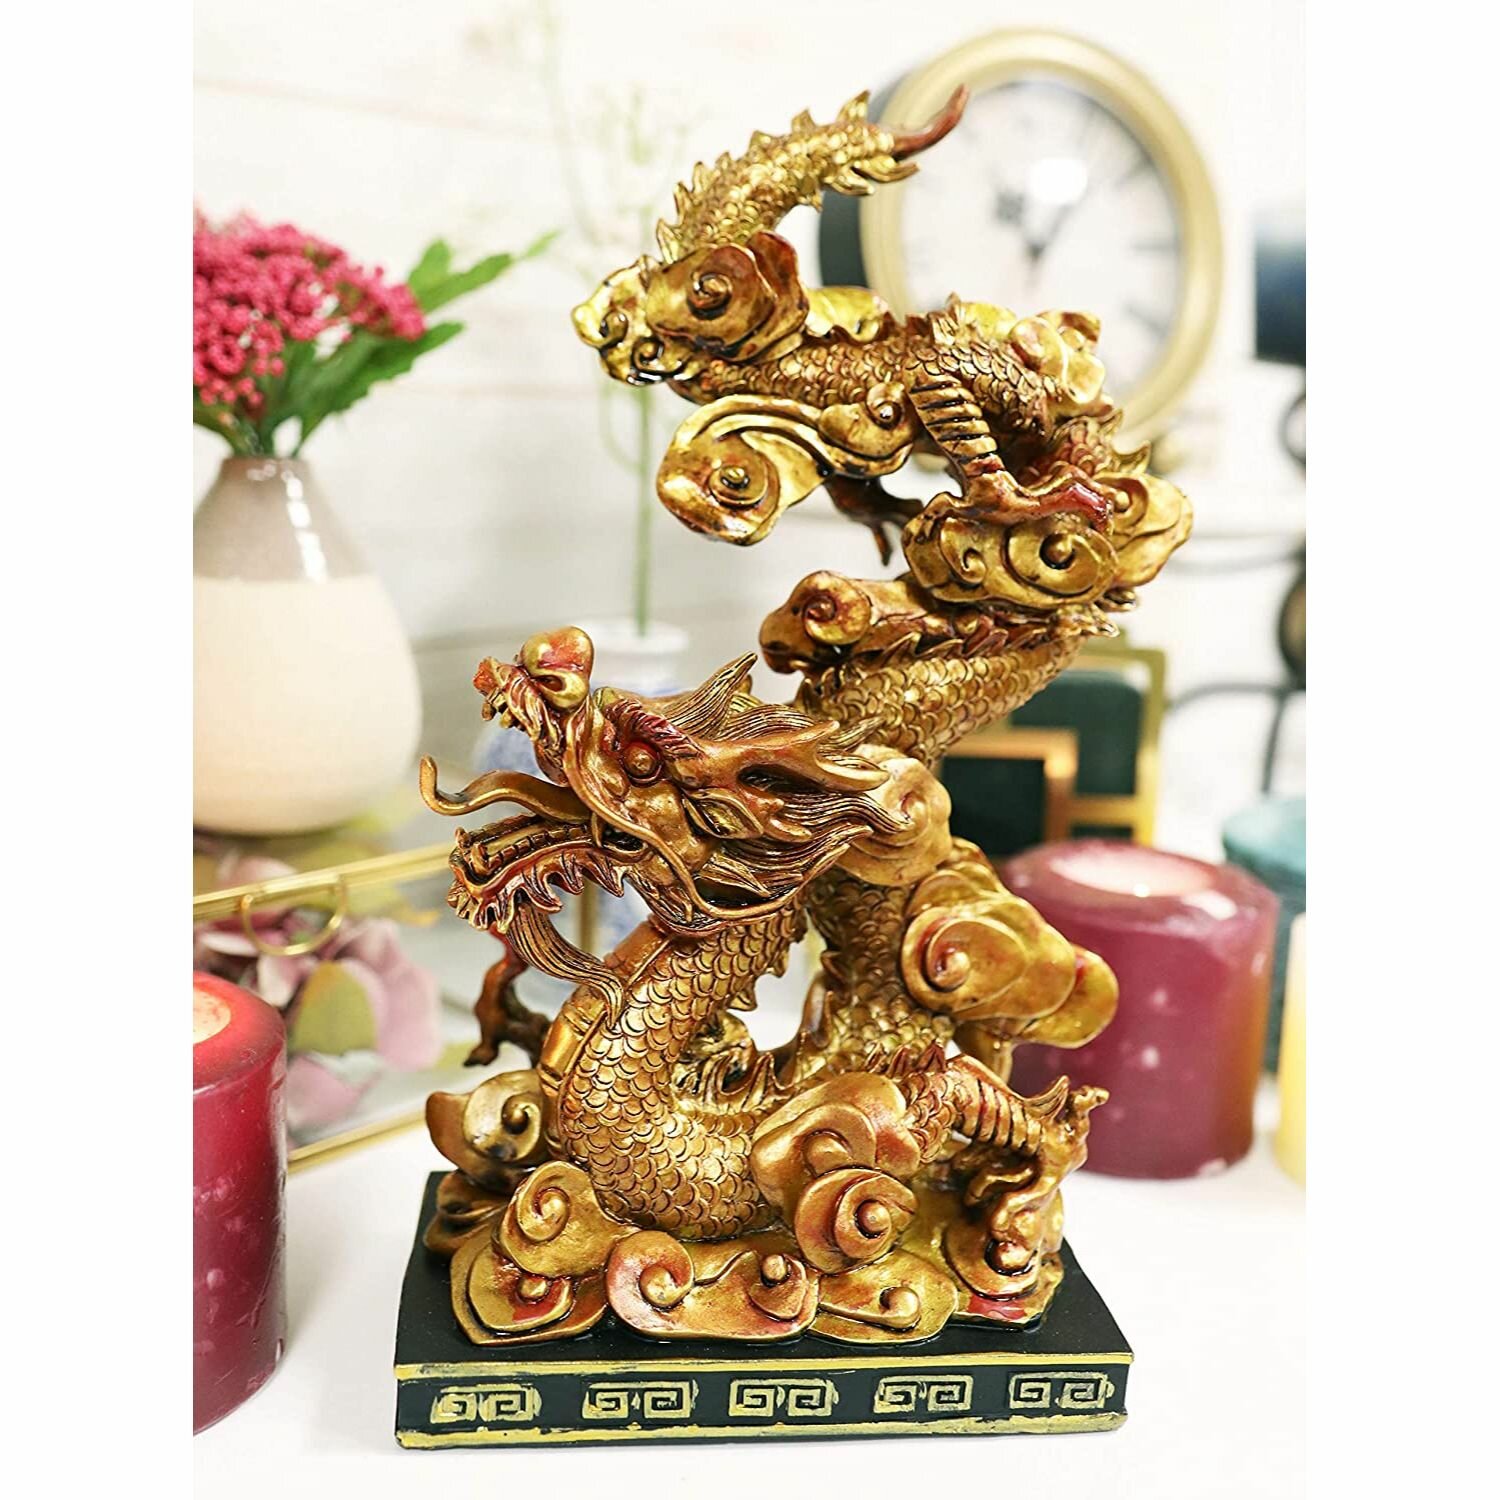 Wooden Dragon Statue New Year Figurine Chinese Fengshui